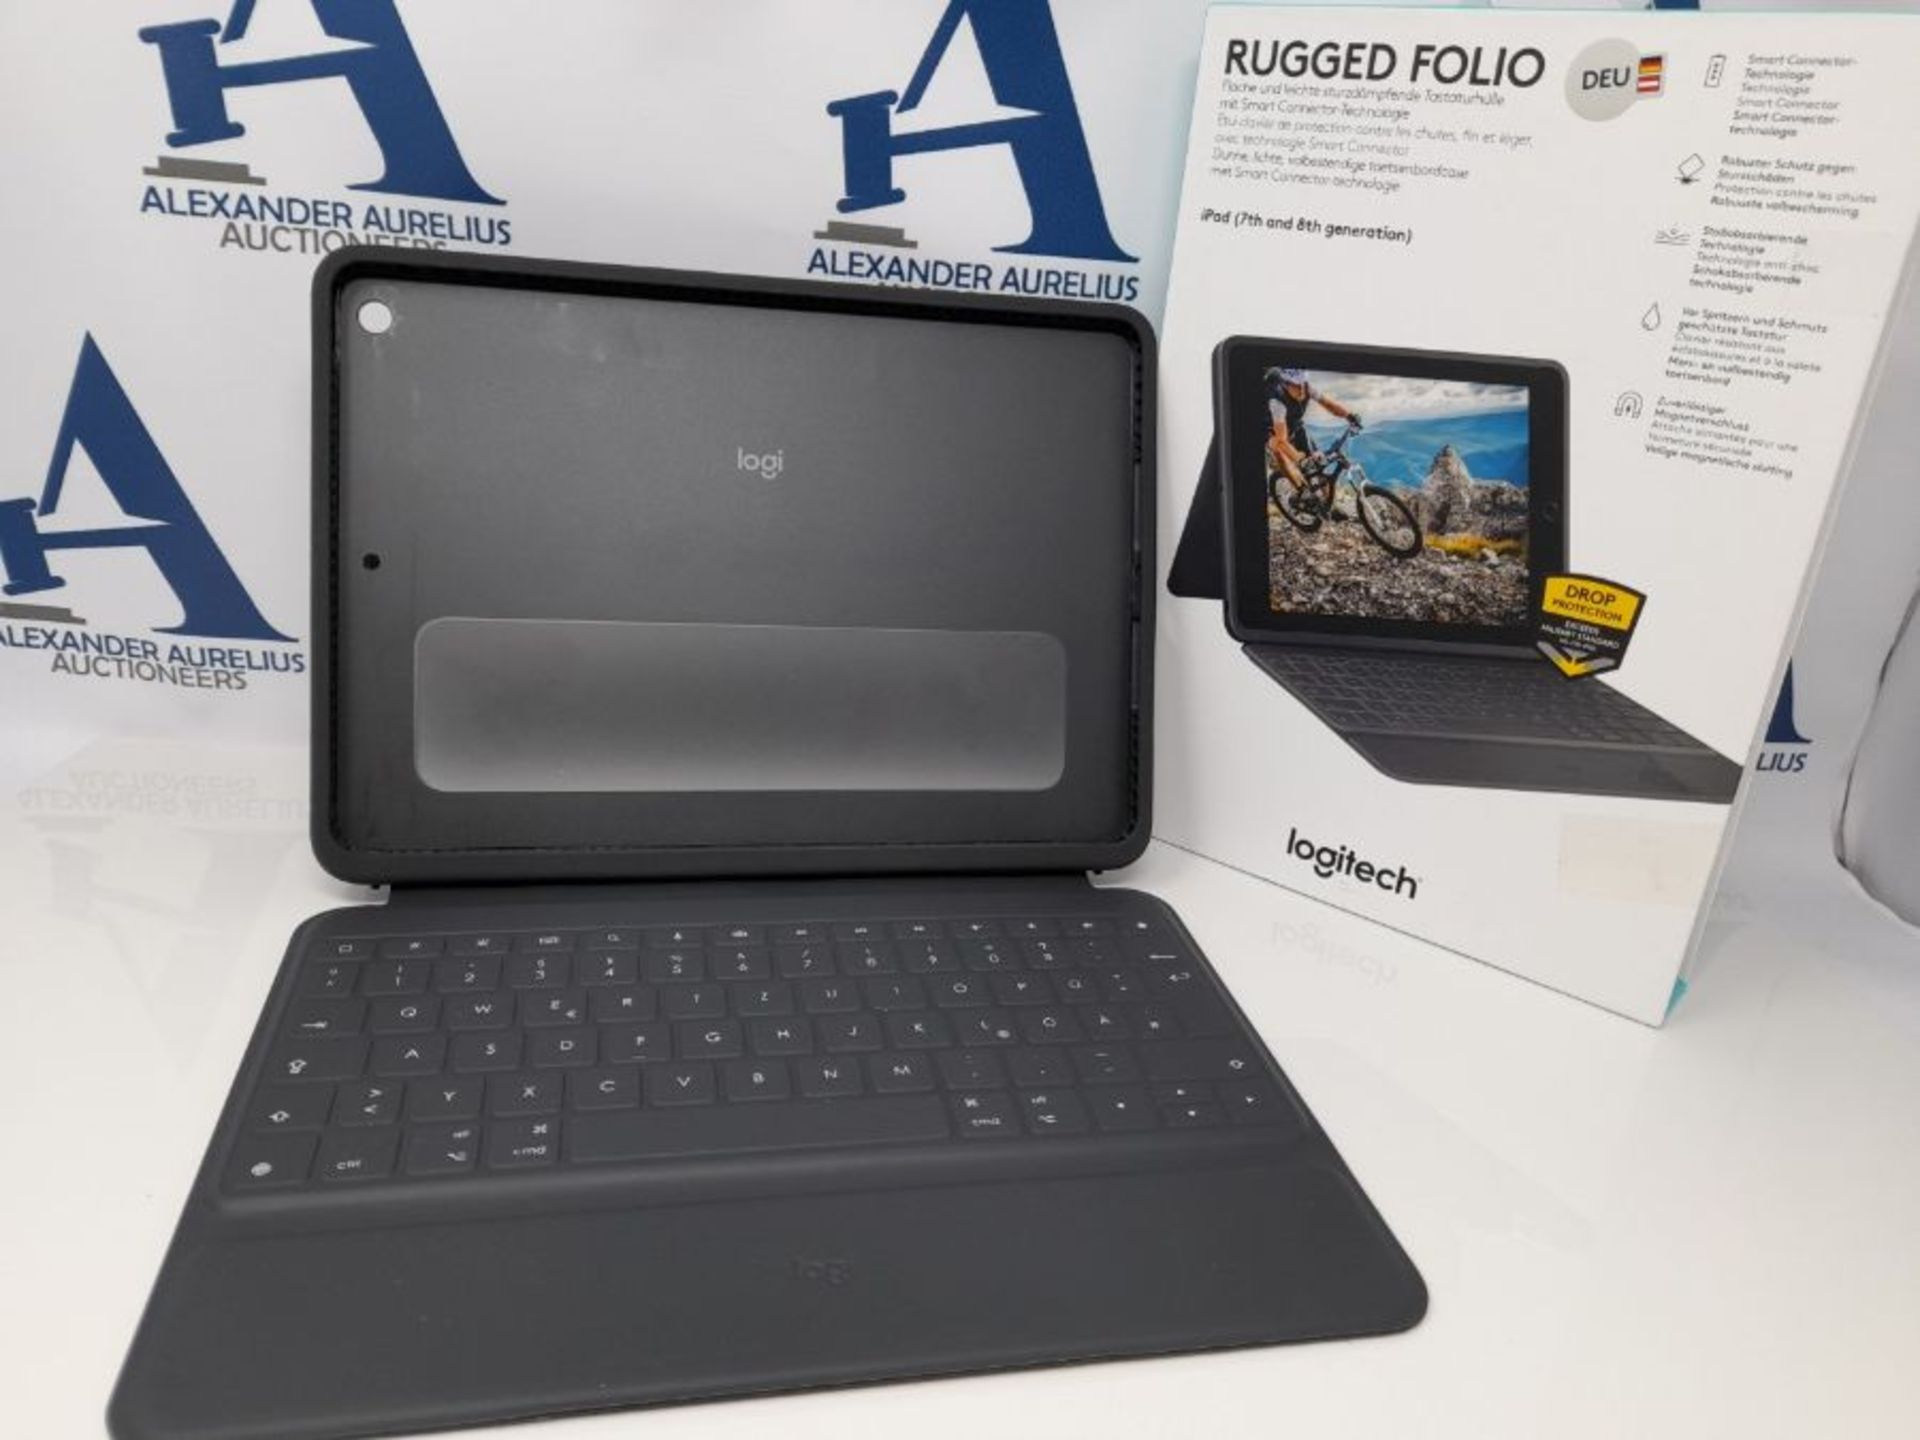 RRP £101.00 Logitech Rugged Folio for iPad (7th, 8th, & 9th generation) Protective Keyboard Case, - Image 2 of 3